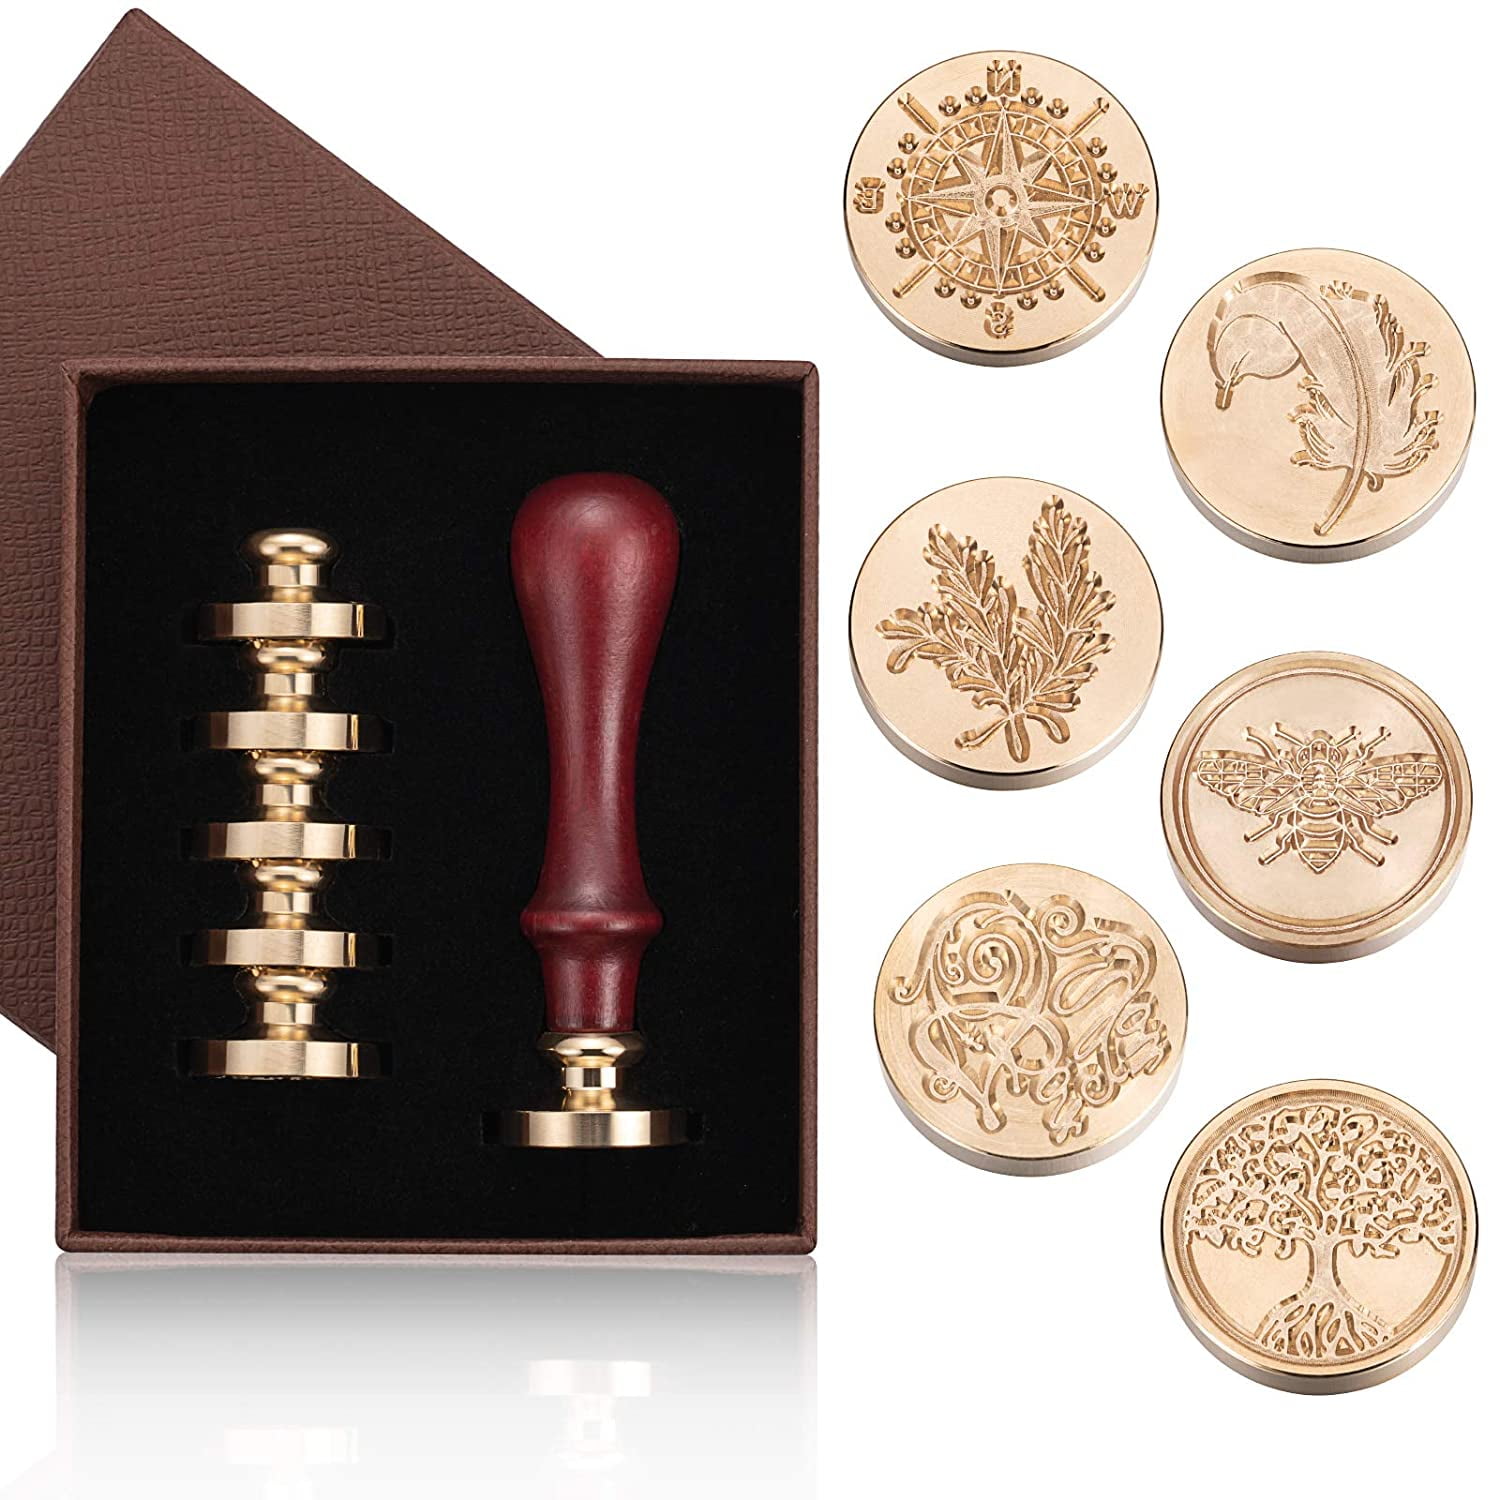 Peacock Feather Wax Seal Stamp and Wood Handle Sets happy birthday Invitation Stamp